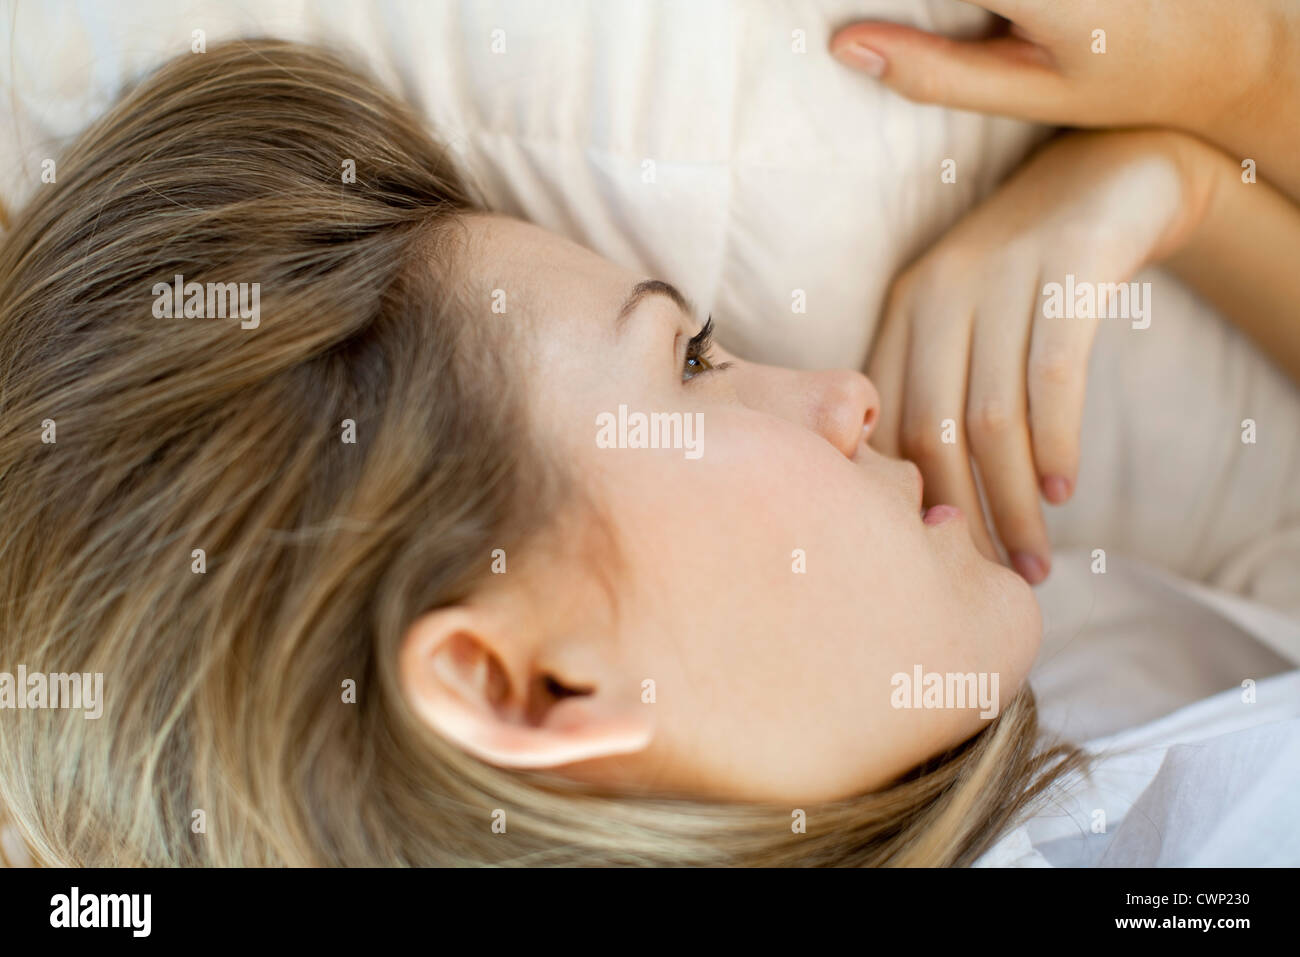 Woman lying down, looking away in thought Stock Photo